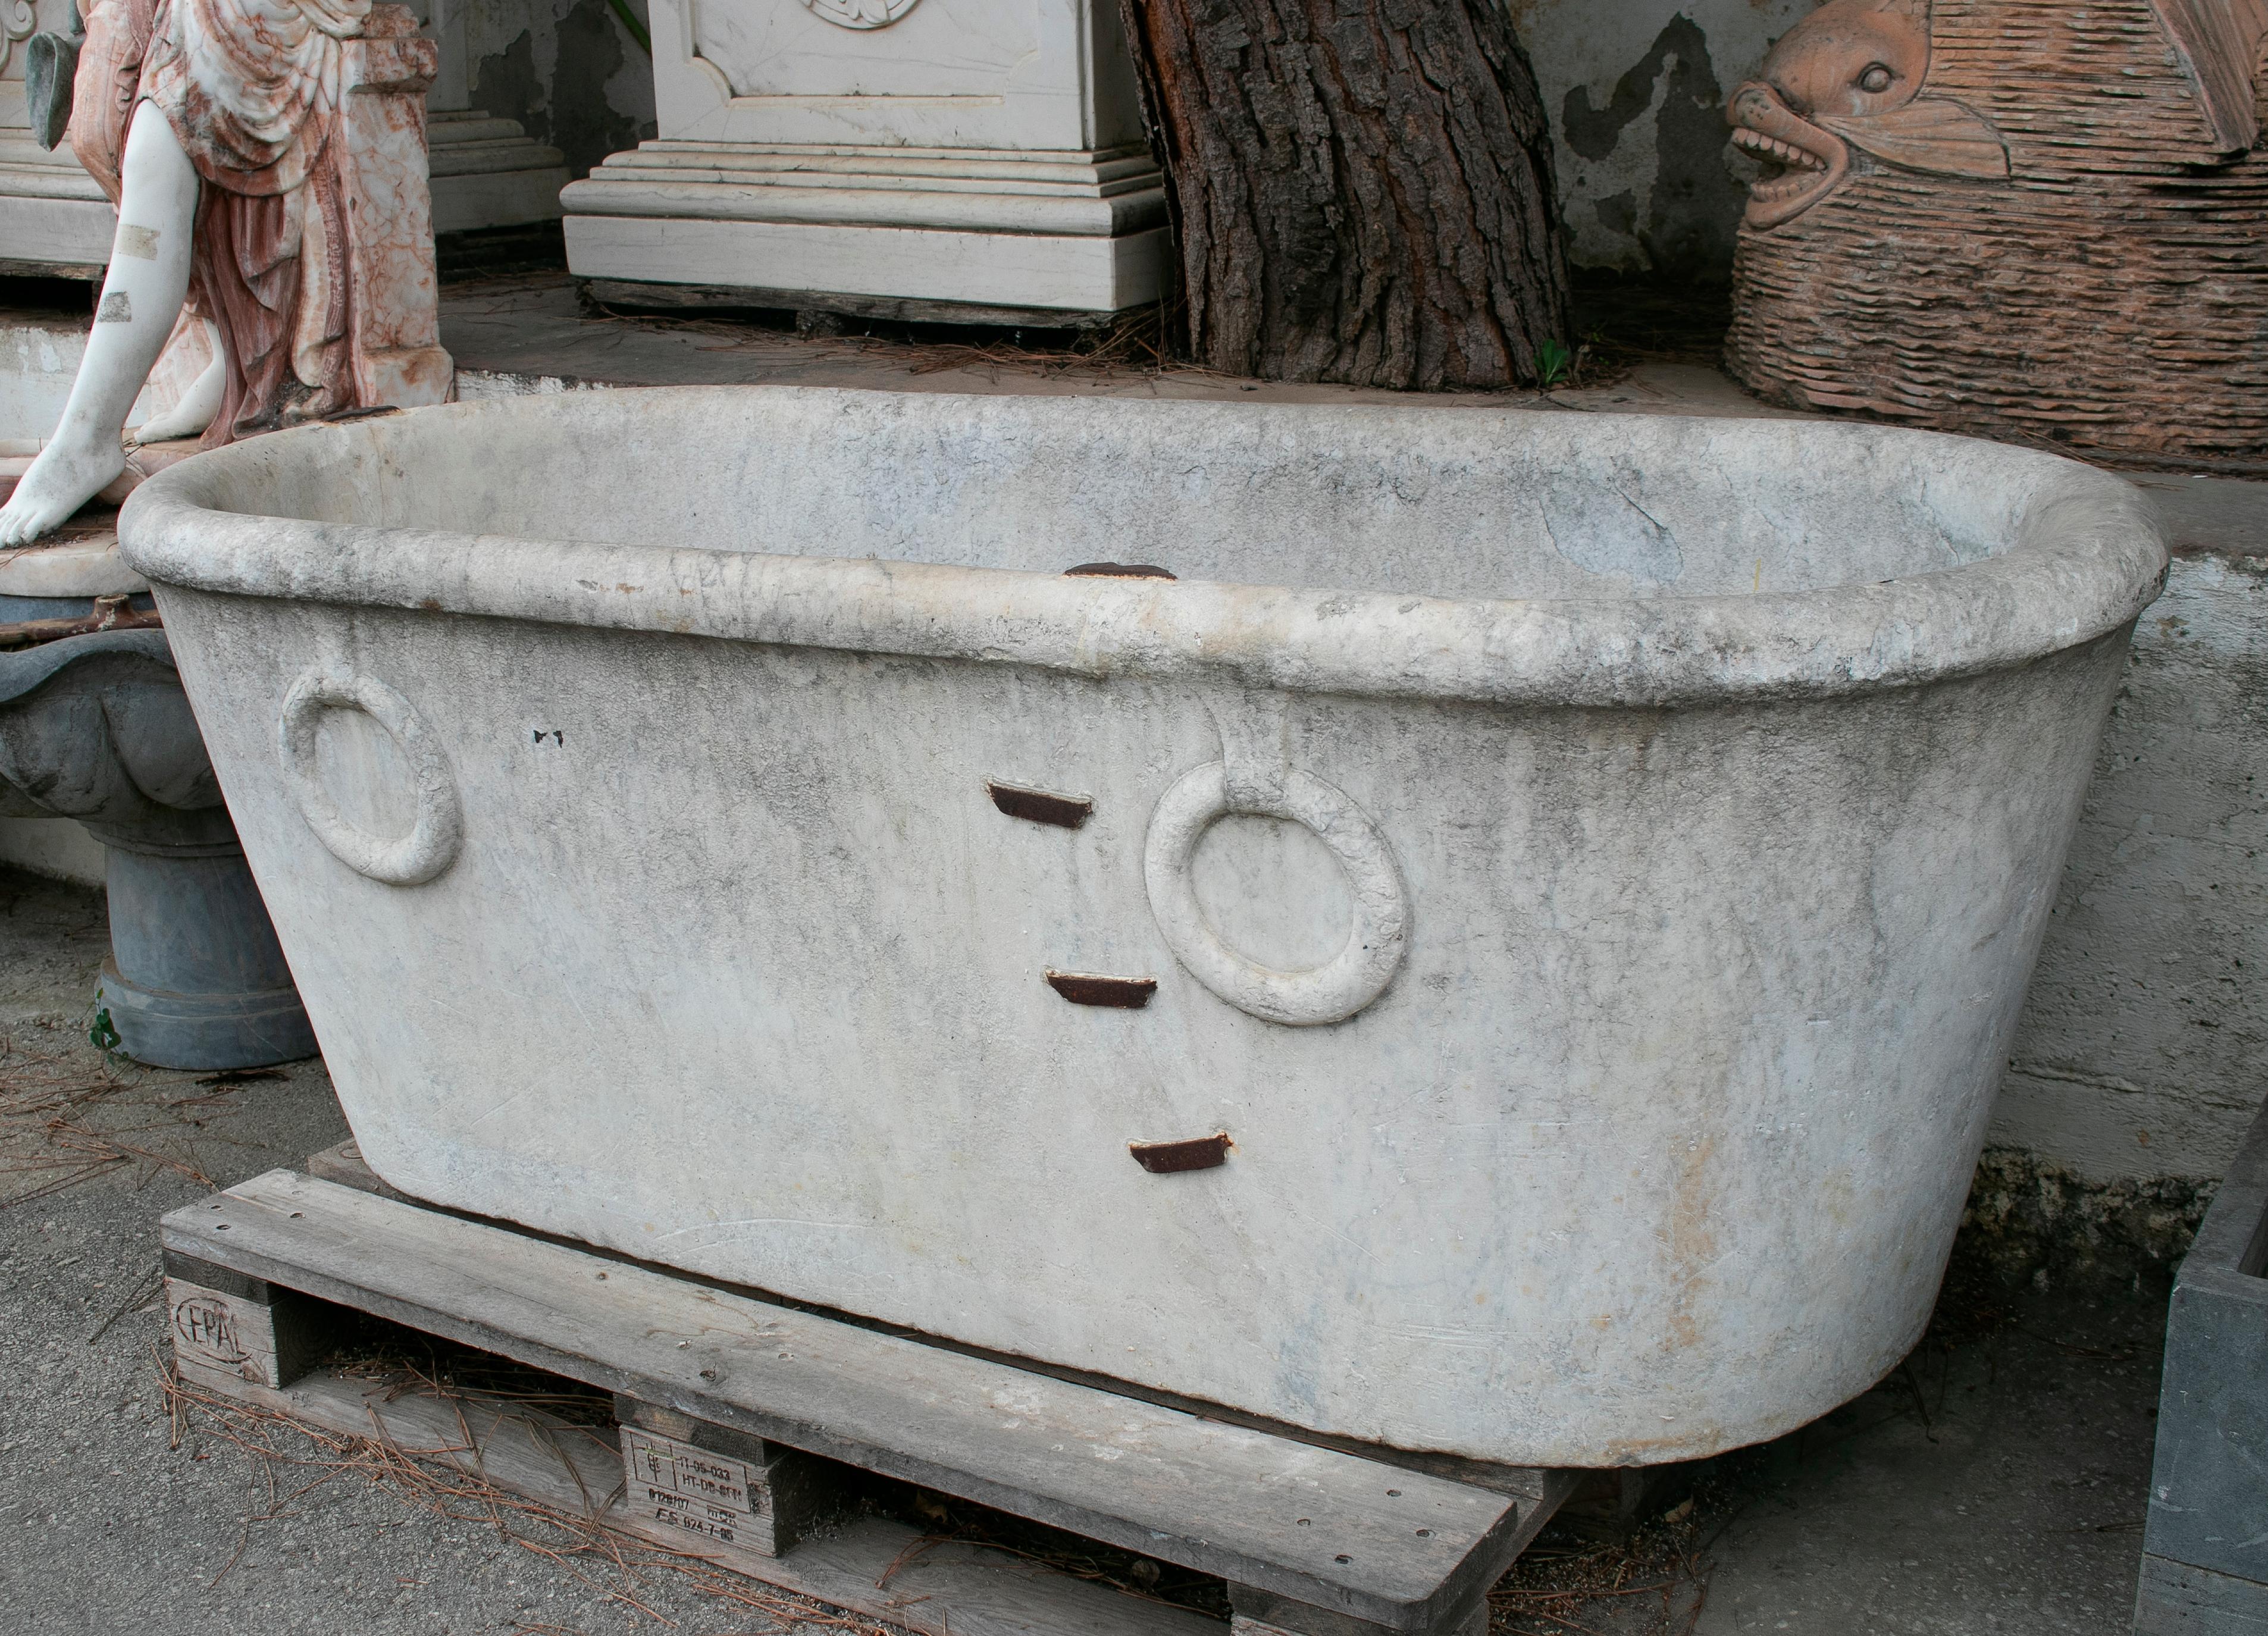 19th century Spanish one block solid marble bath with rings, repaired and restored using antique iron grapples.